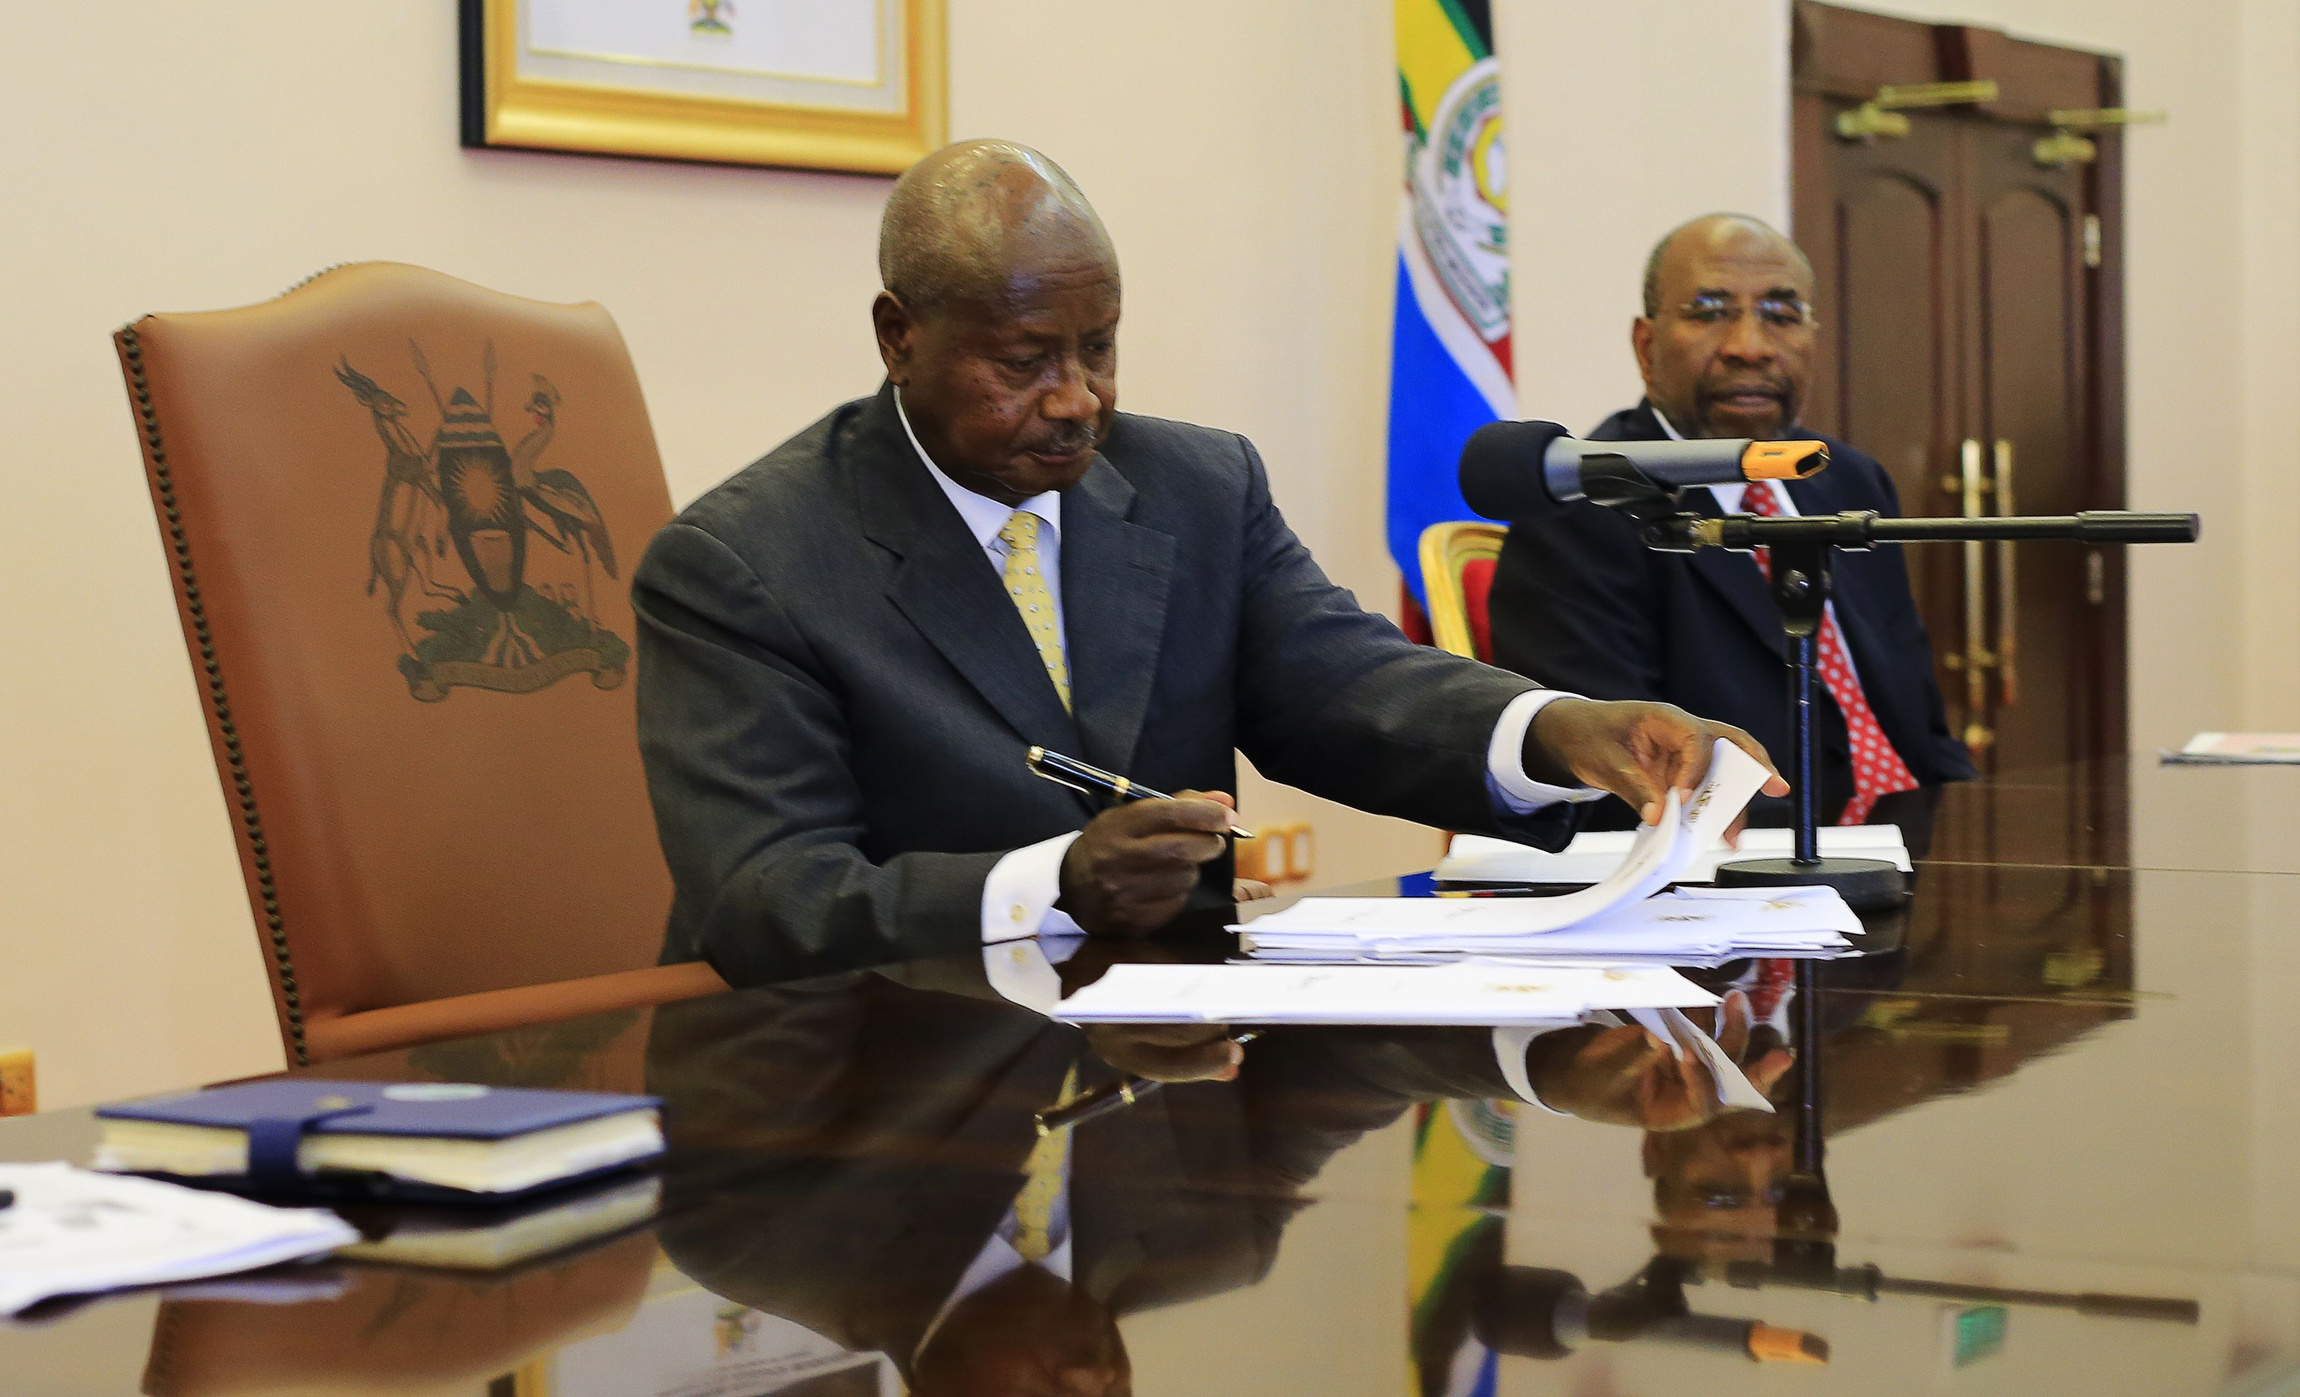 Uganda President Yoweri Museveni signs an anti-homosexuality bill into law in Entebbe Feb. 24. Uganda's Catholic bishops reaffirmed their opposition to homosexuality, but reserved judgment on the bill, which imposes harsh punishment for homosexual acts. (CNS photo/James Akena, Reuters) (Feb. 26, 2014)